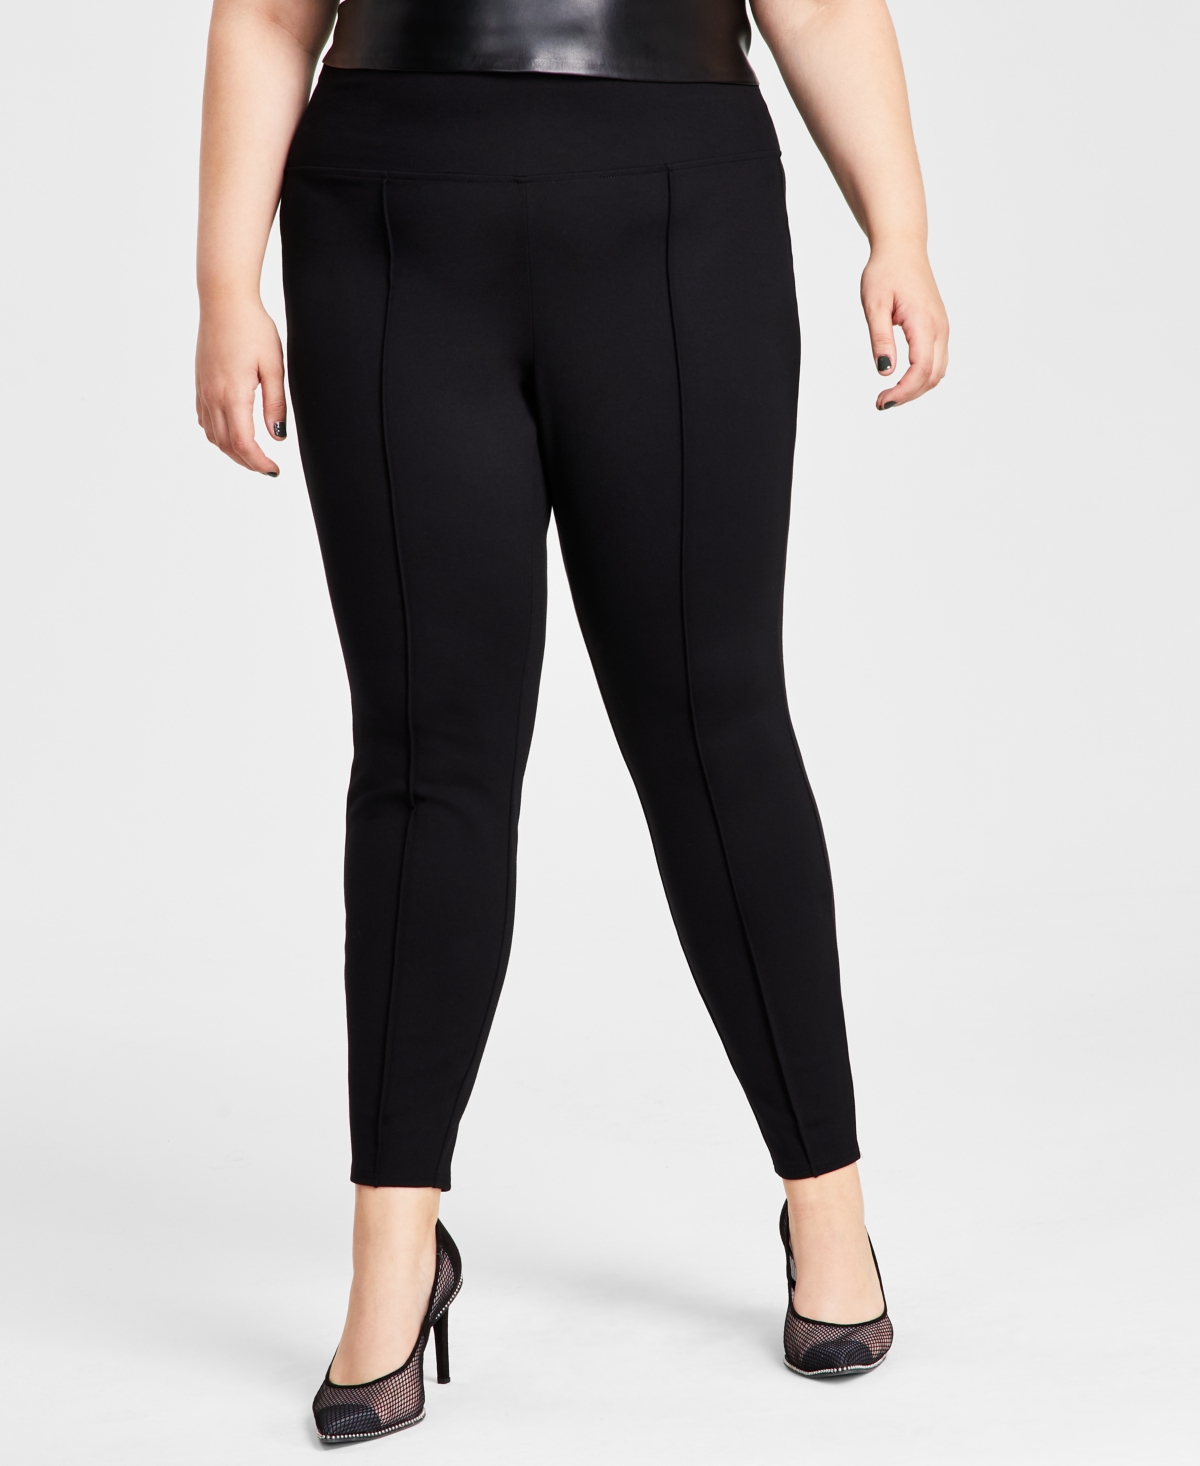 Bar Iii Plus Size High-rise Ponte-knit Leggings, Created For Macy's In Deep Black